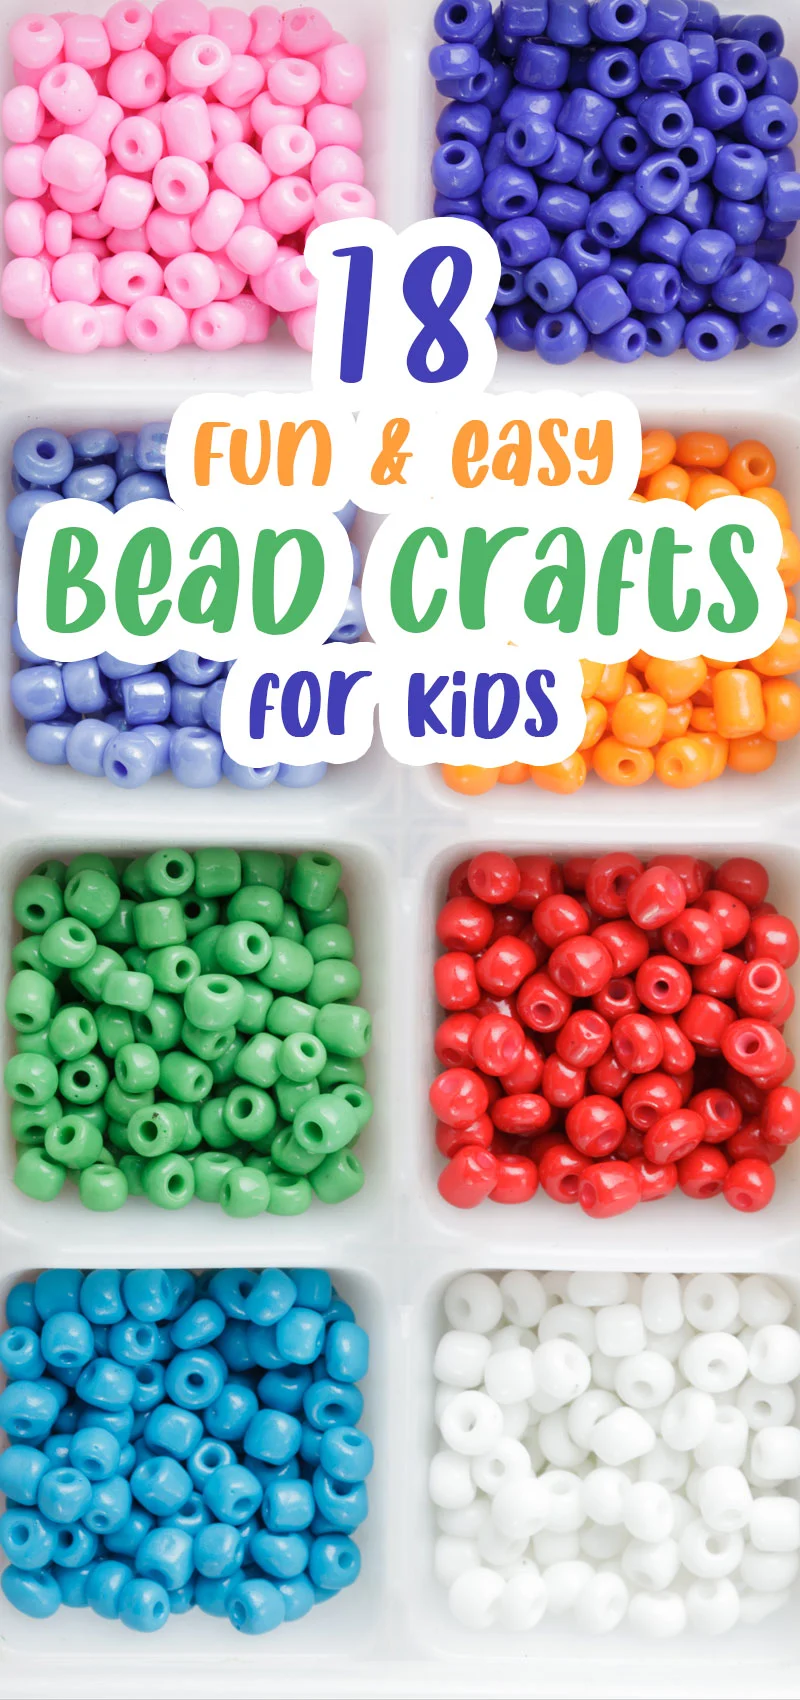 bead crafts for kids